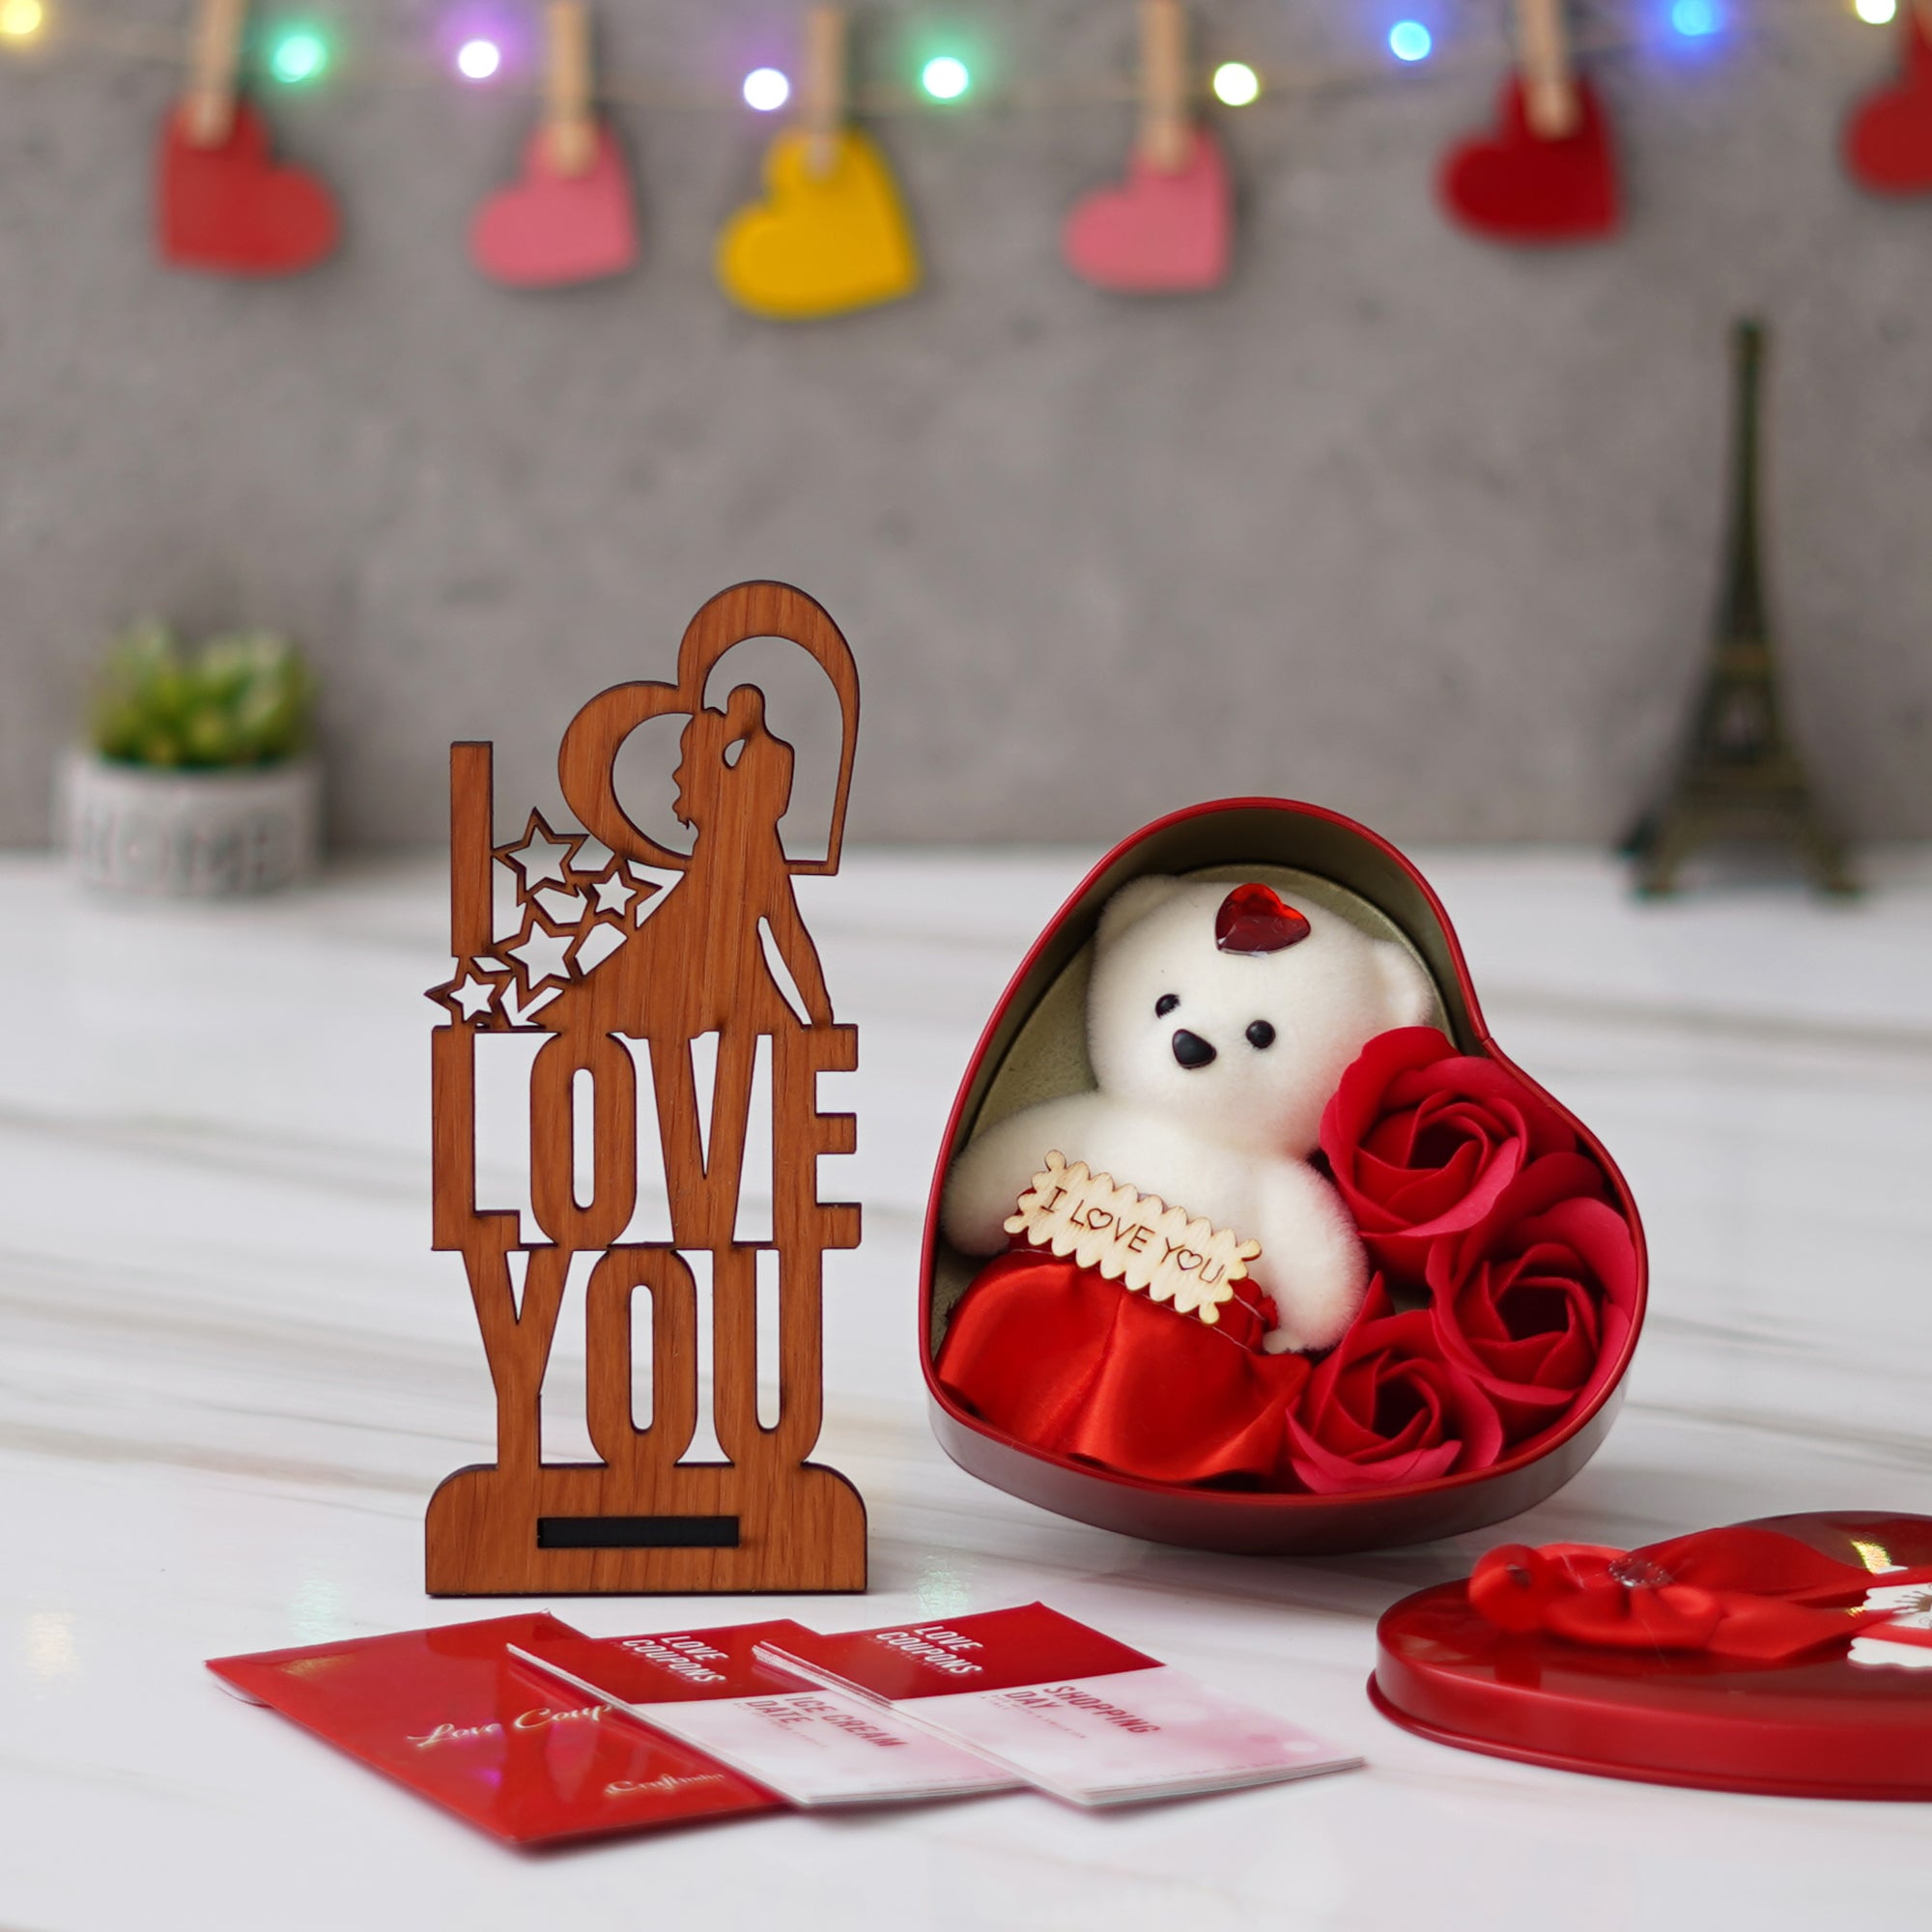 Valentine Combo of Pack of 12 Love Coupons Gift Cards Set, "Love You" Wooden Showpiece With Stand, Heart Shaped Gift Box Set with White Teddy and Red Roses